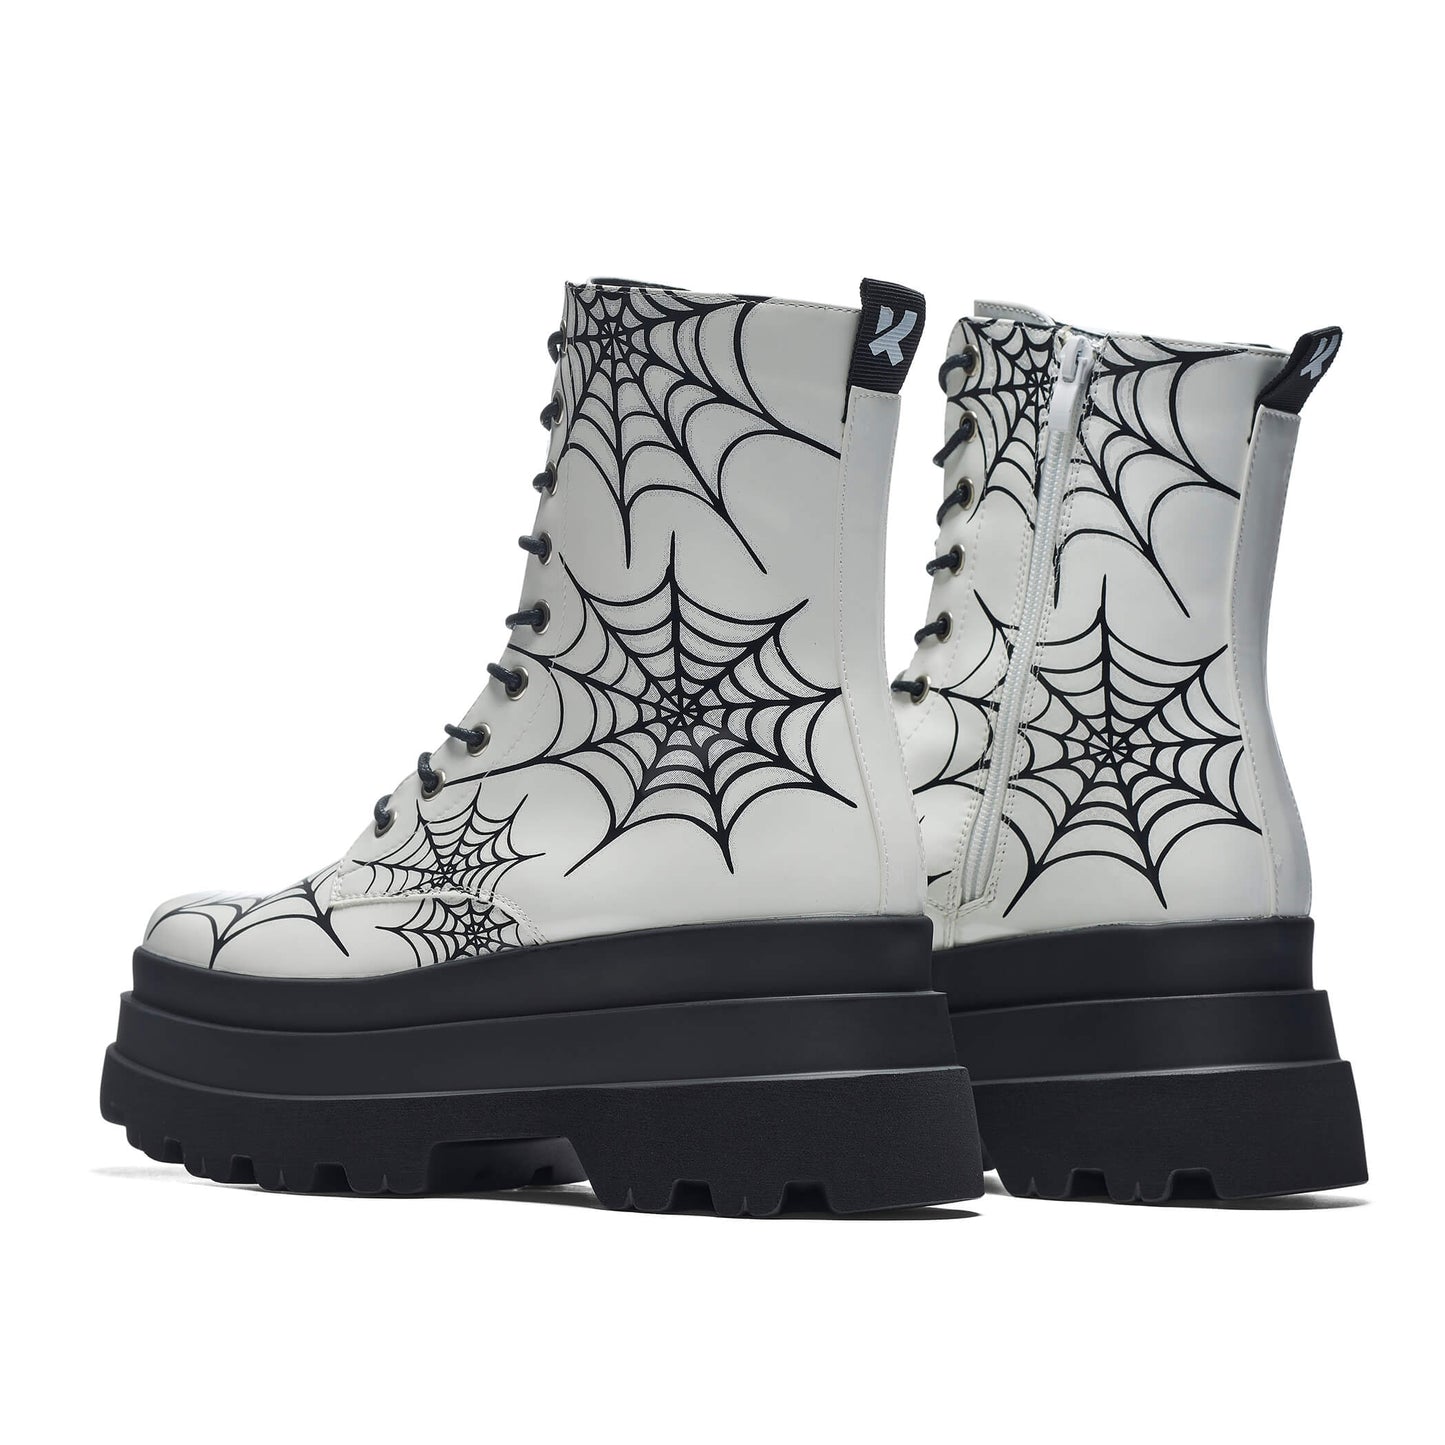 Web Trap Trident Boots - Ankle Boots - KOI Footwear - White - Back Side View